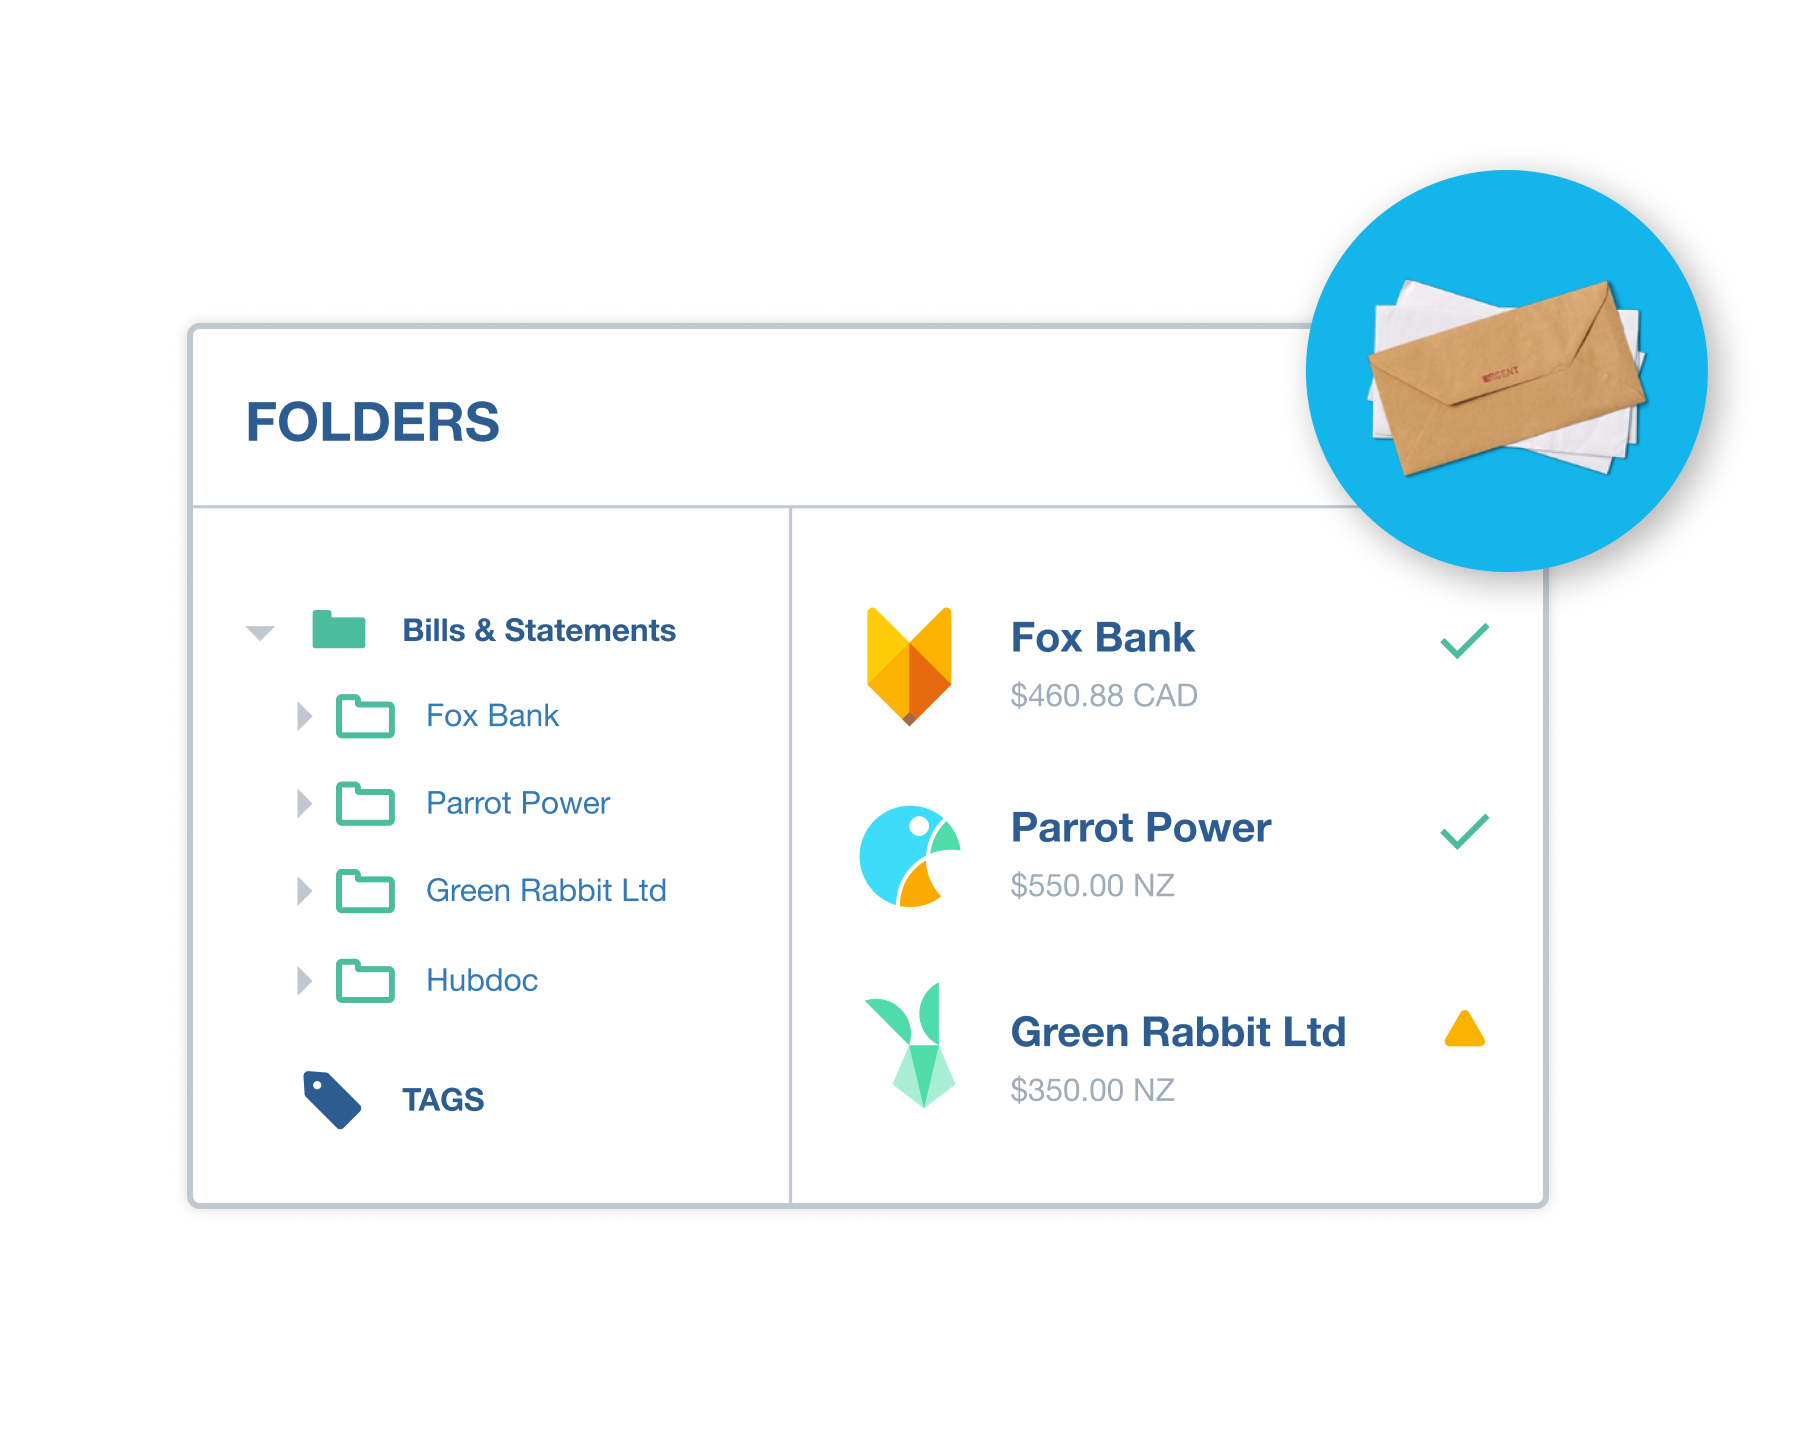 Folders in Hubdoc show how to organise data capture.